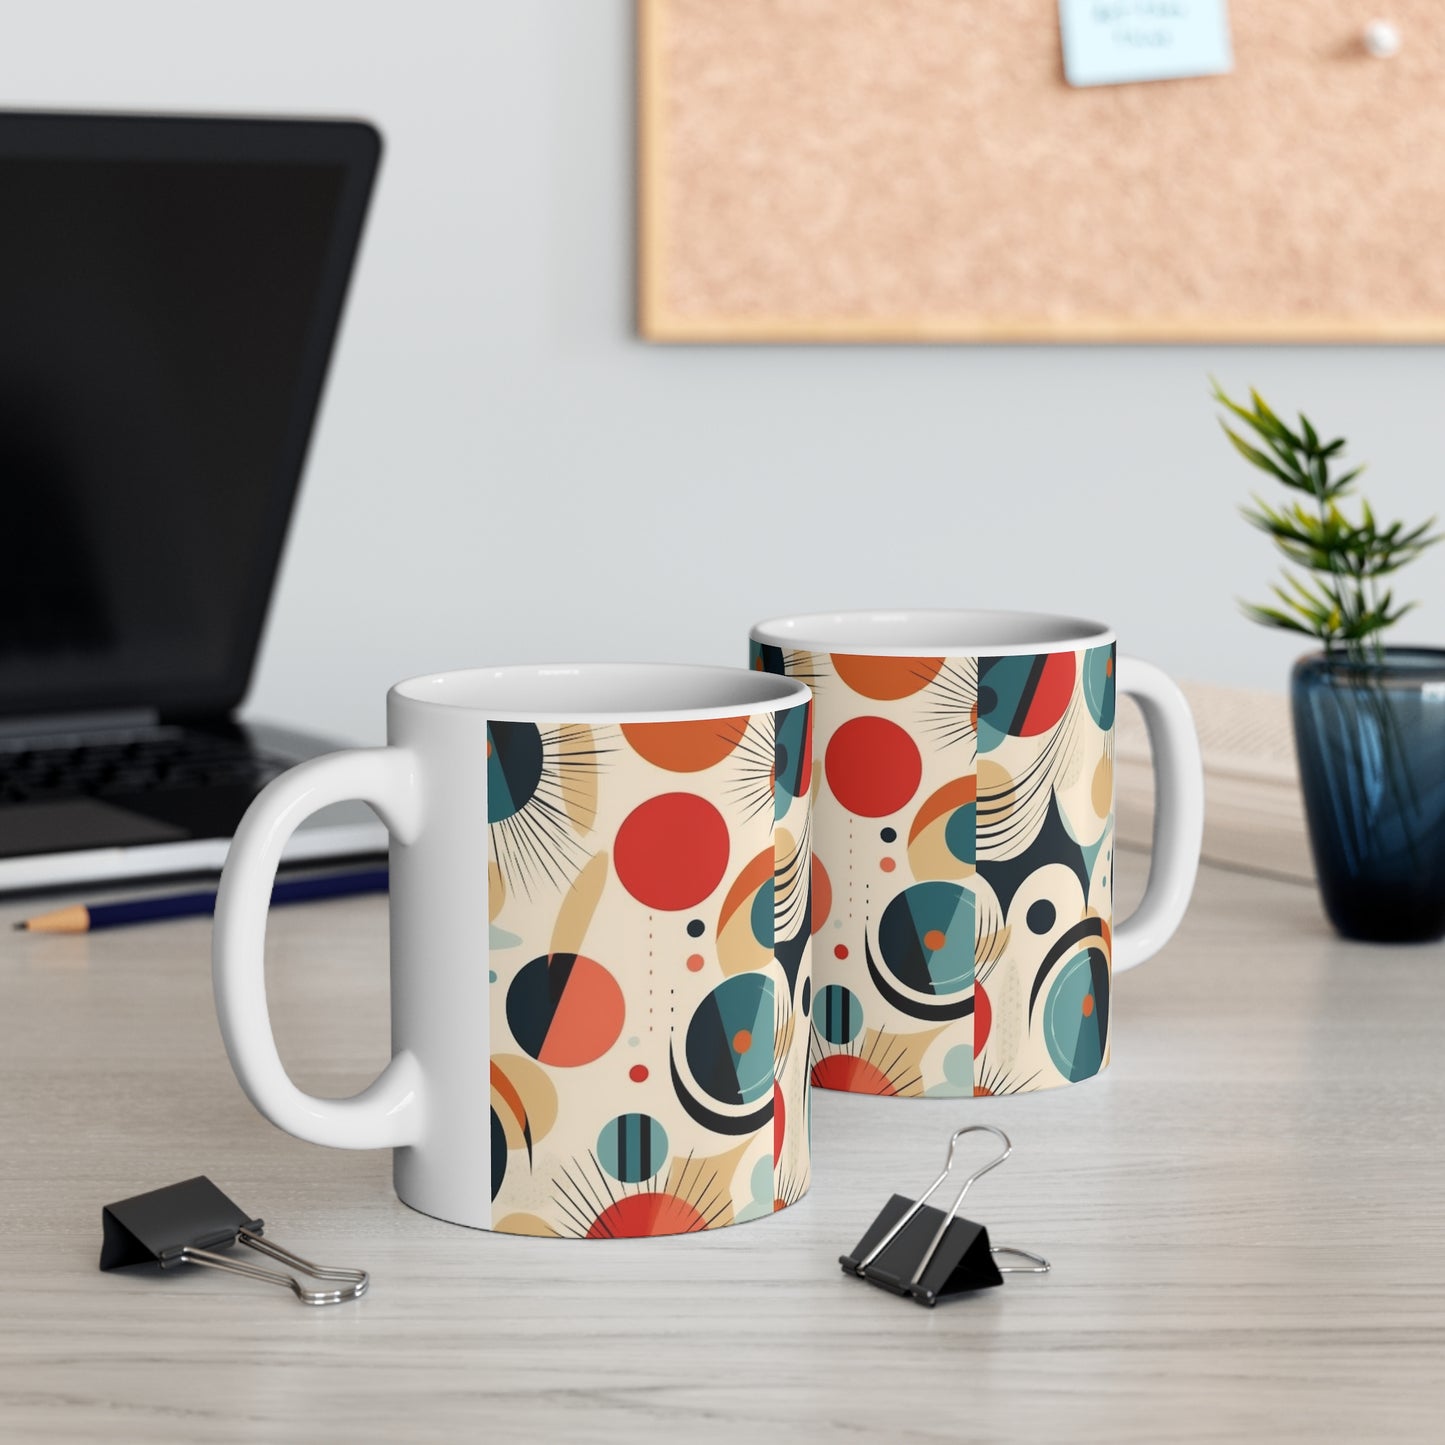 Midcentury Modern Delight: Ceramic Mug with Abstract Art and Atomic Age Design